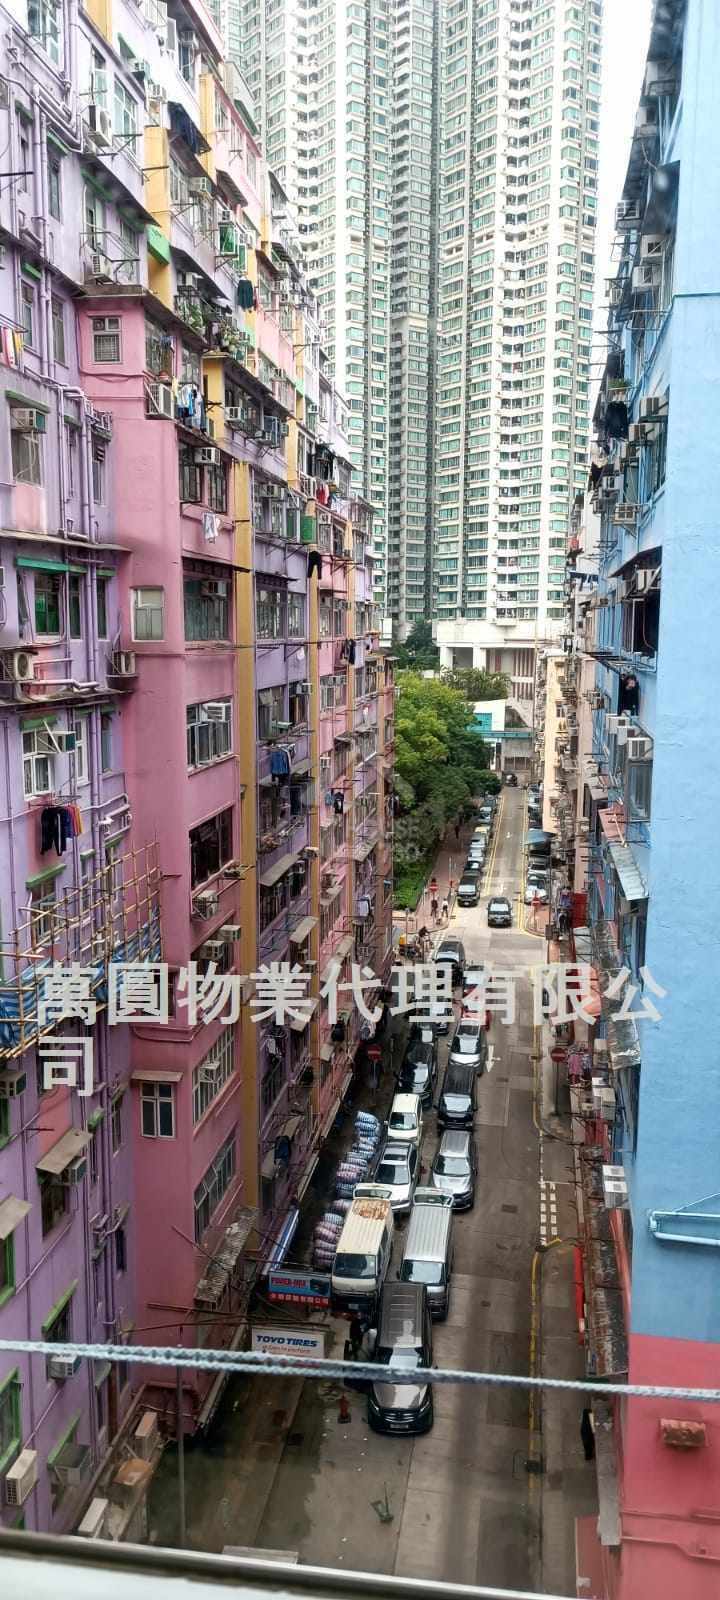 Tai Kok Tsui CHUNG HING BUILDING Middle Floor View from Living Room House730-6238277